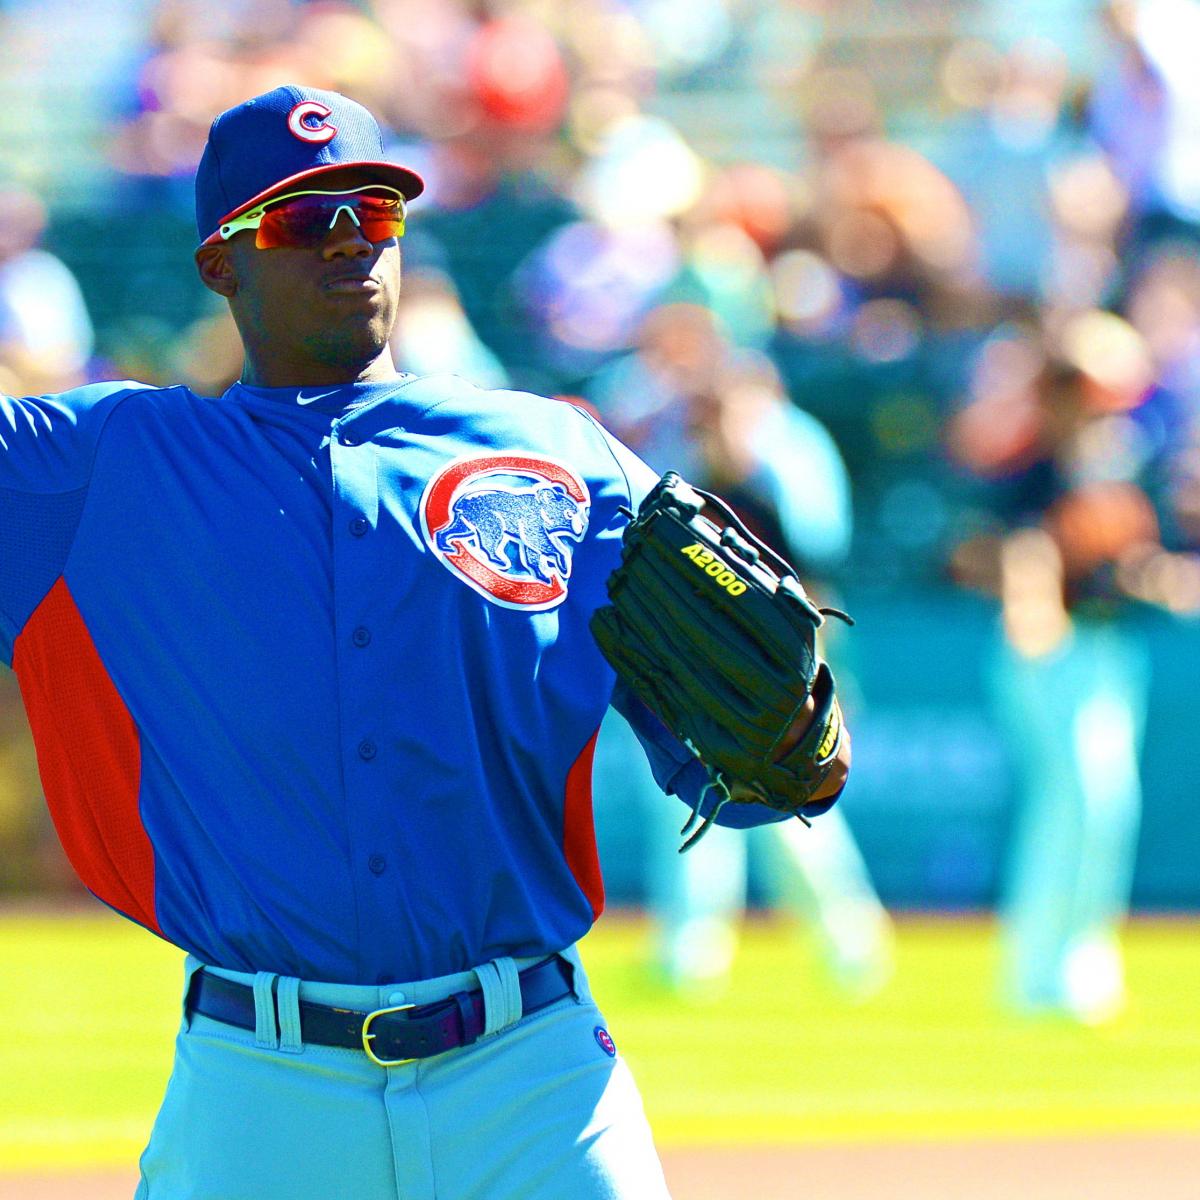 Cubs prospect Jorge Soler charges dugout with a bat